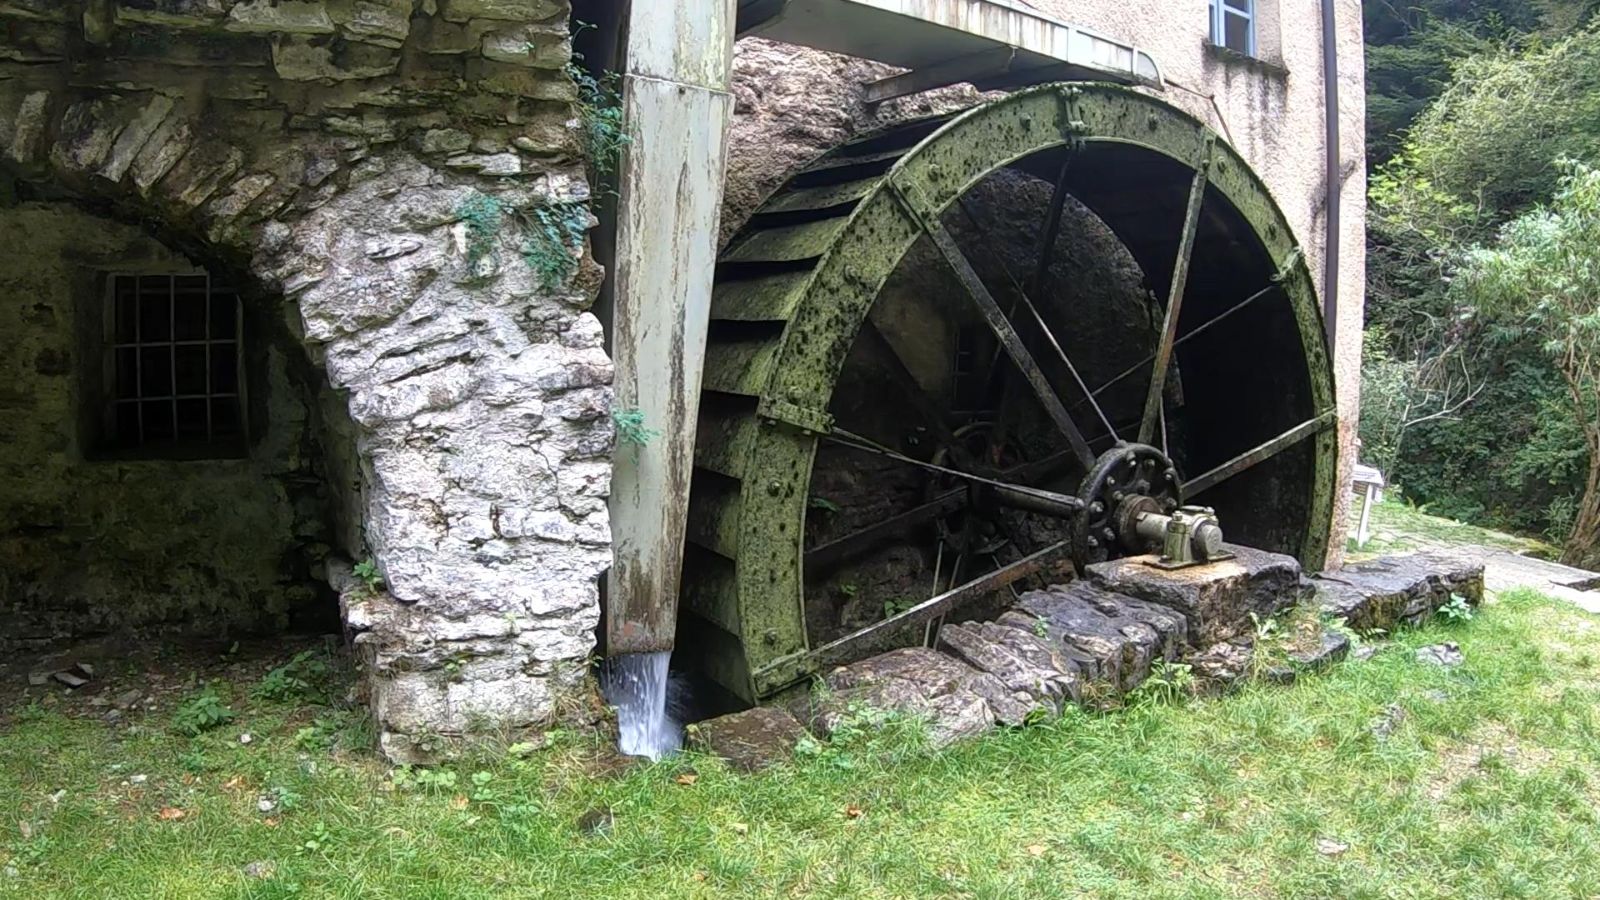 The Bruzella mill, from prehistory to the wheel. 